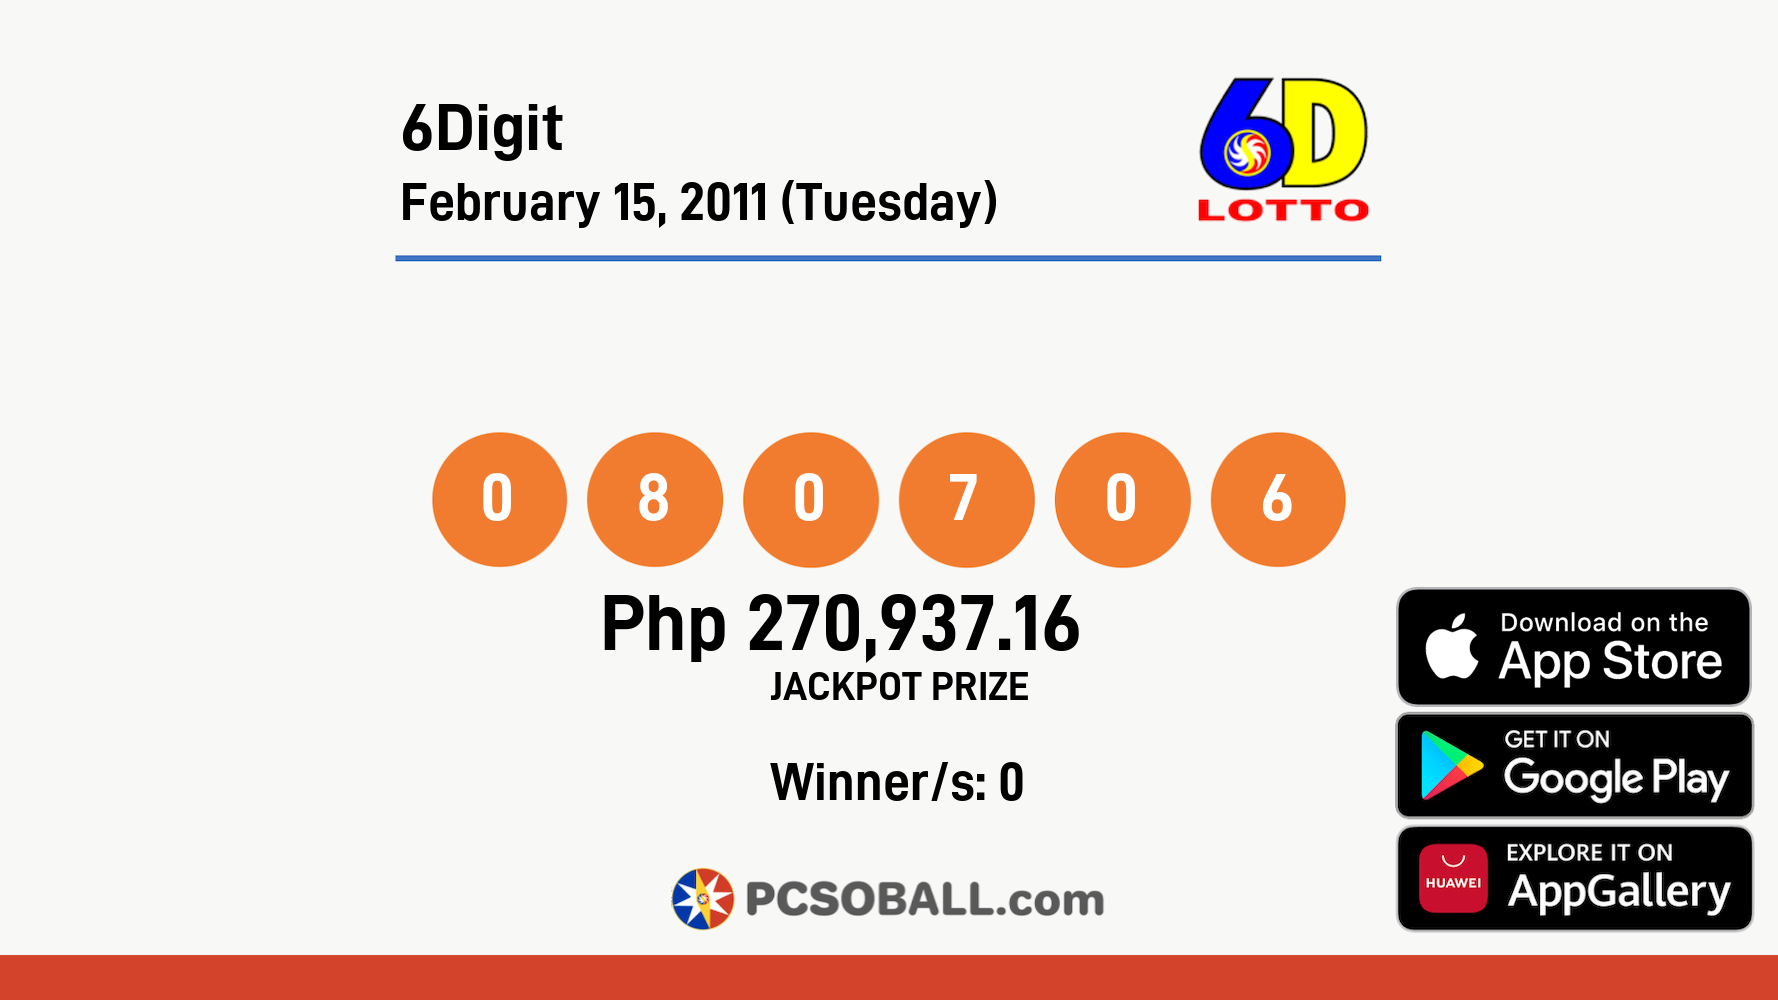 6Digit February 15, 2011 (Tuesday) Result